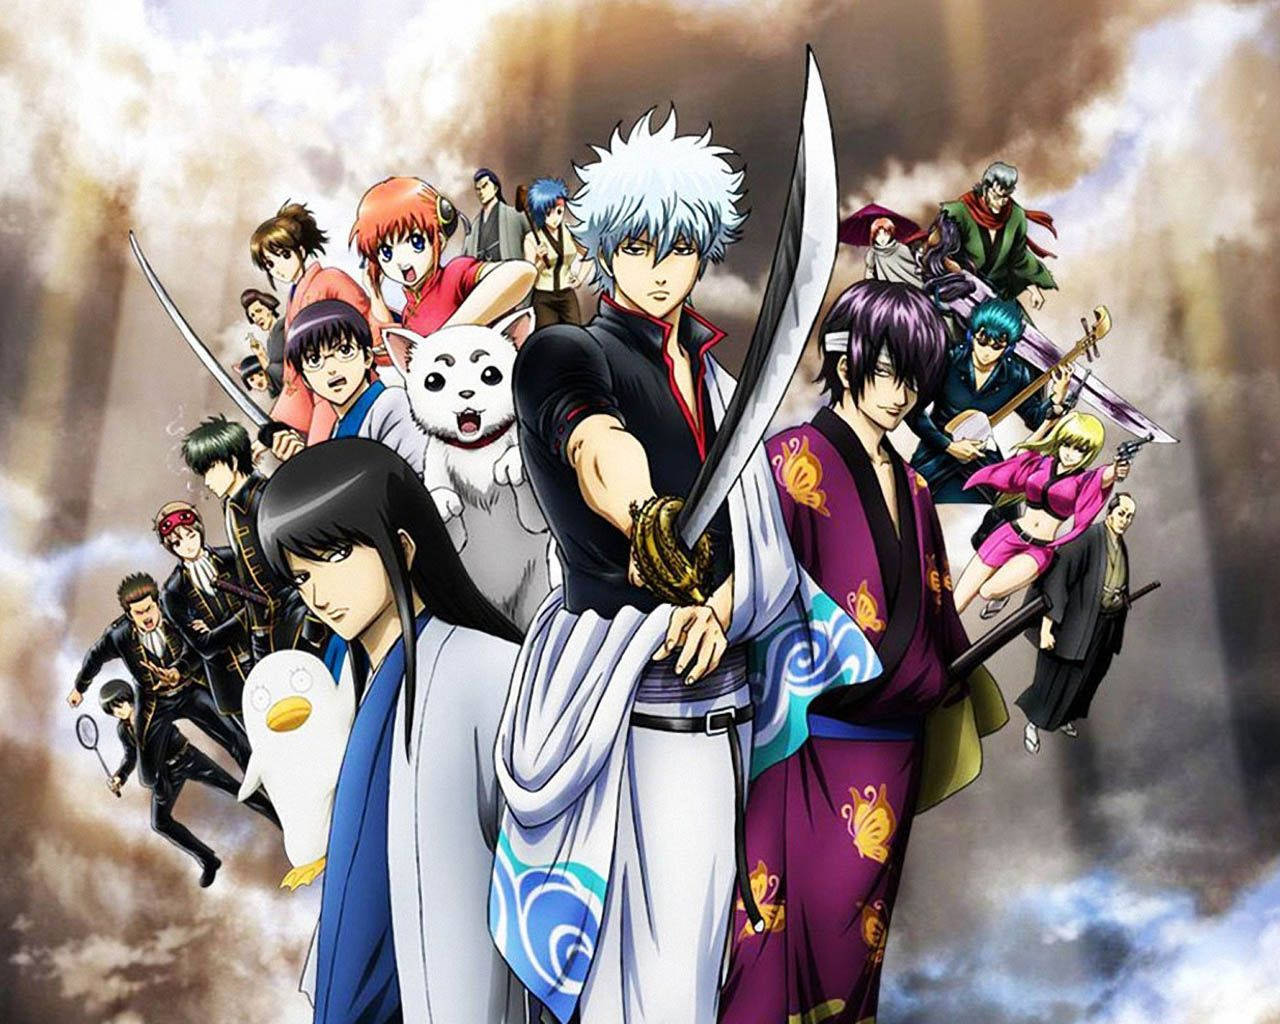 "Stress makes you bald, but it’s stressful to avoid stress, so you end up stressed out anyway. In the end, there’s nothing you can do" - Sakata Gintoki